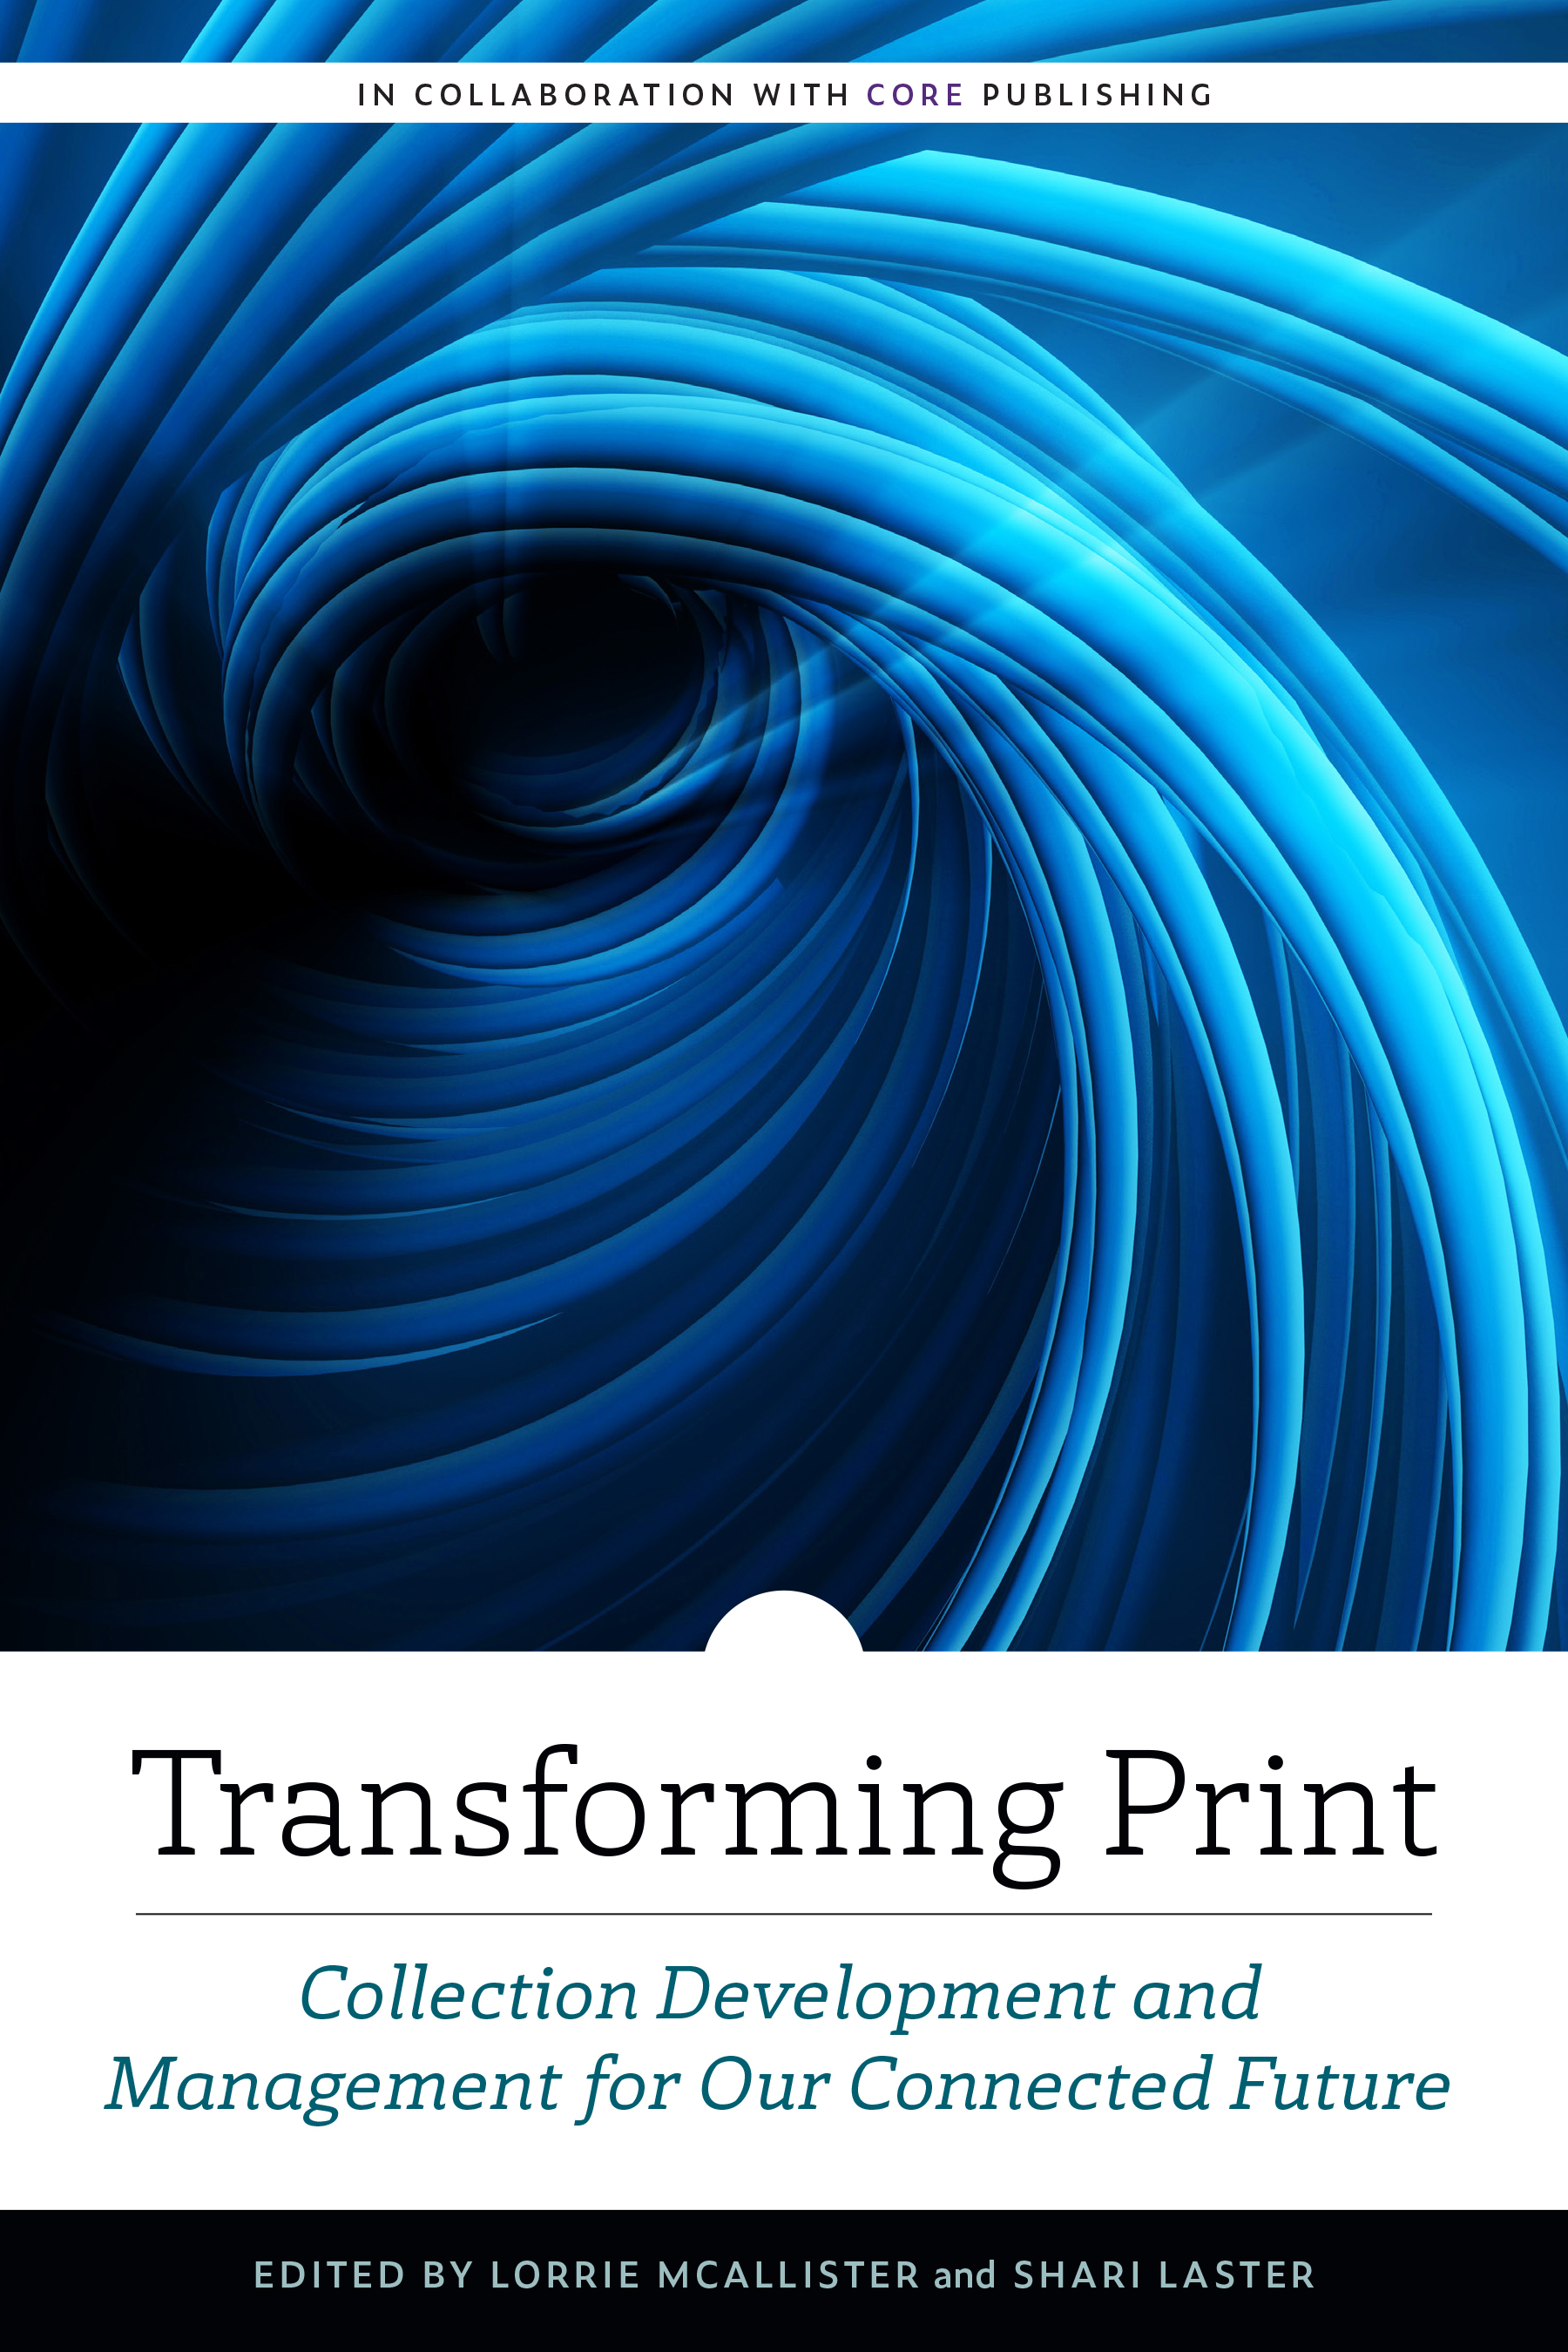 Transforming Print: Collection Development and Management for Our Future | ALA Store